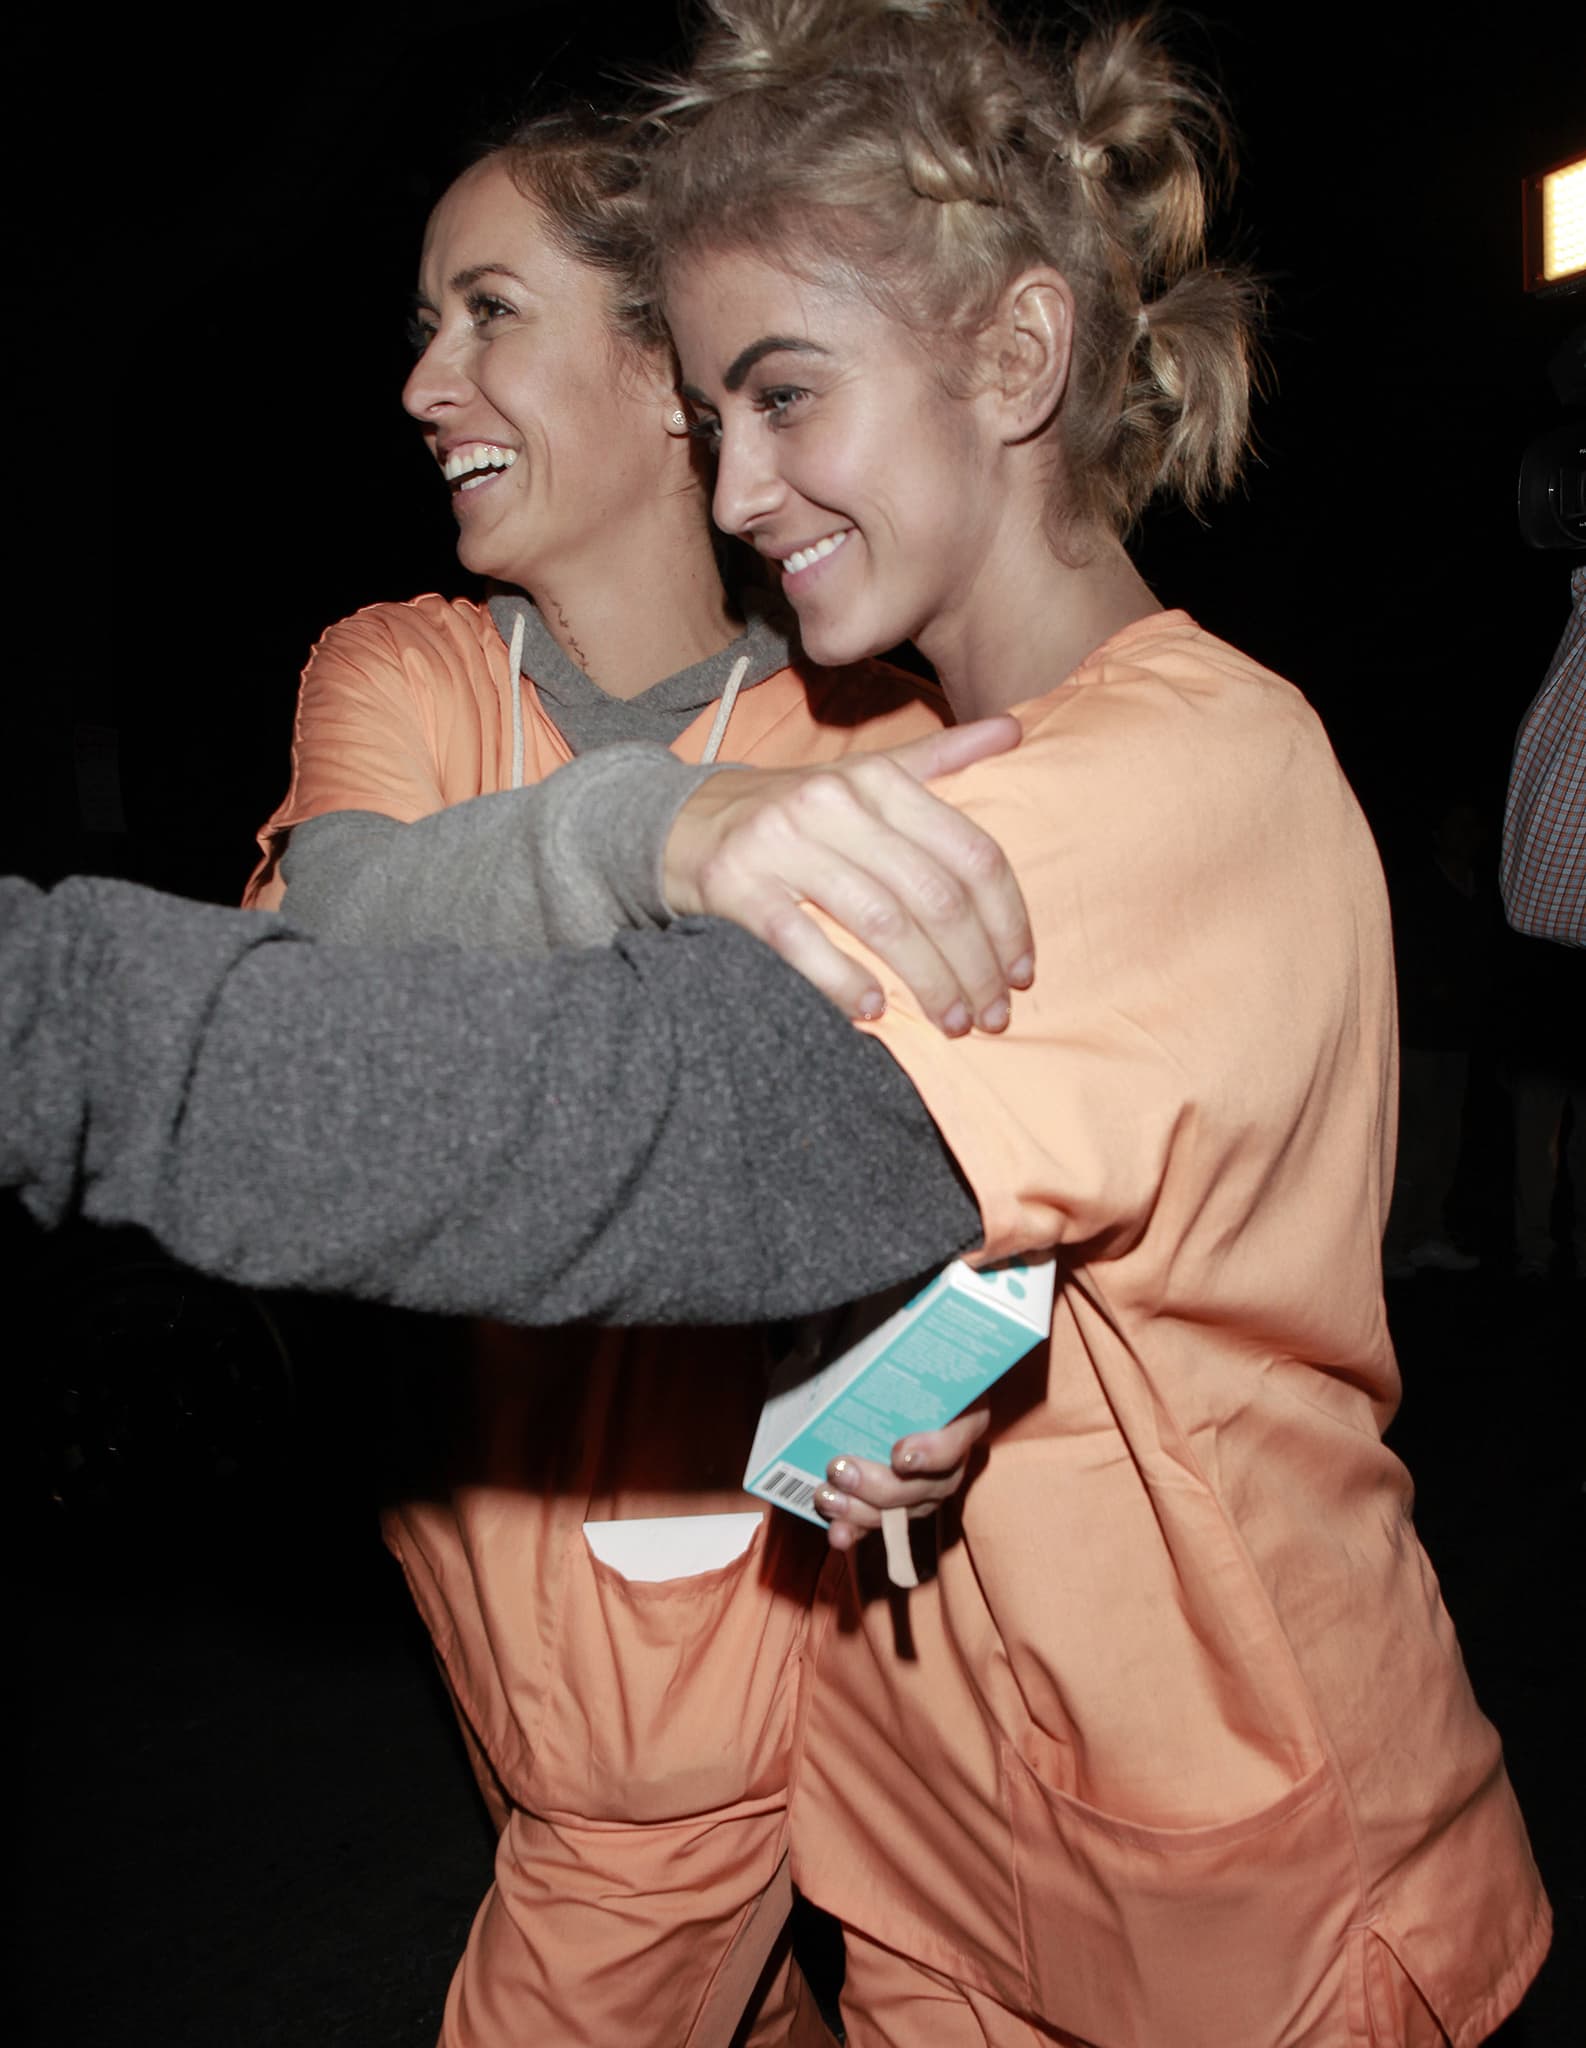 Julianne Hough was slammed for dressing up as a character from Orange Is the New Black in 2013